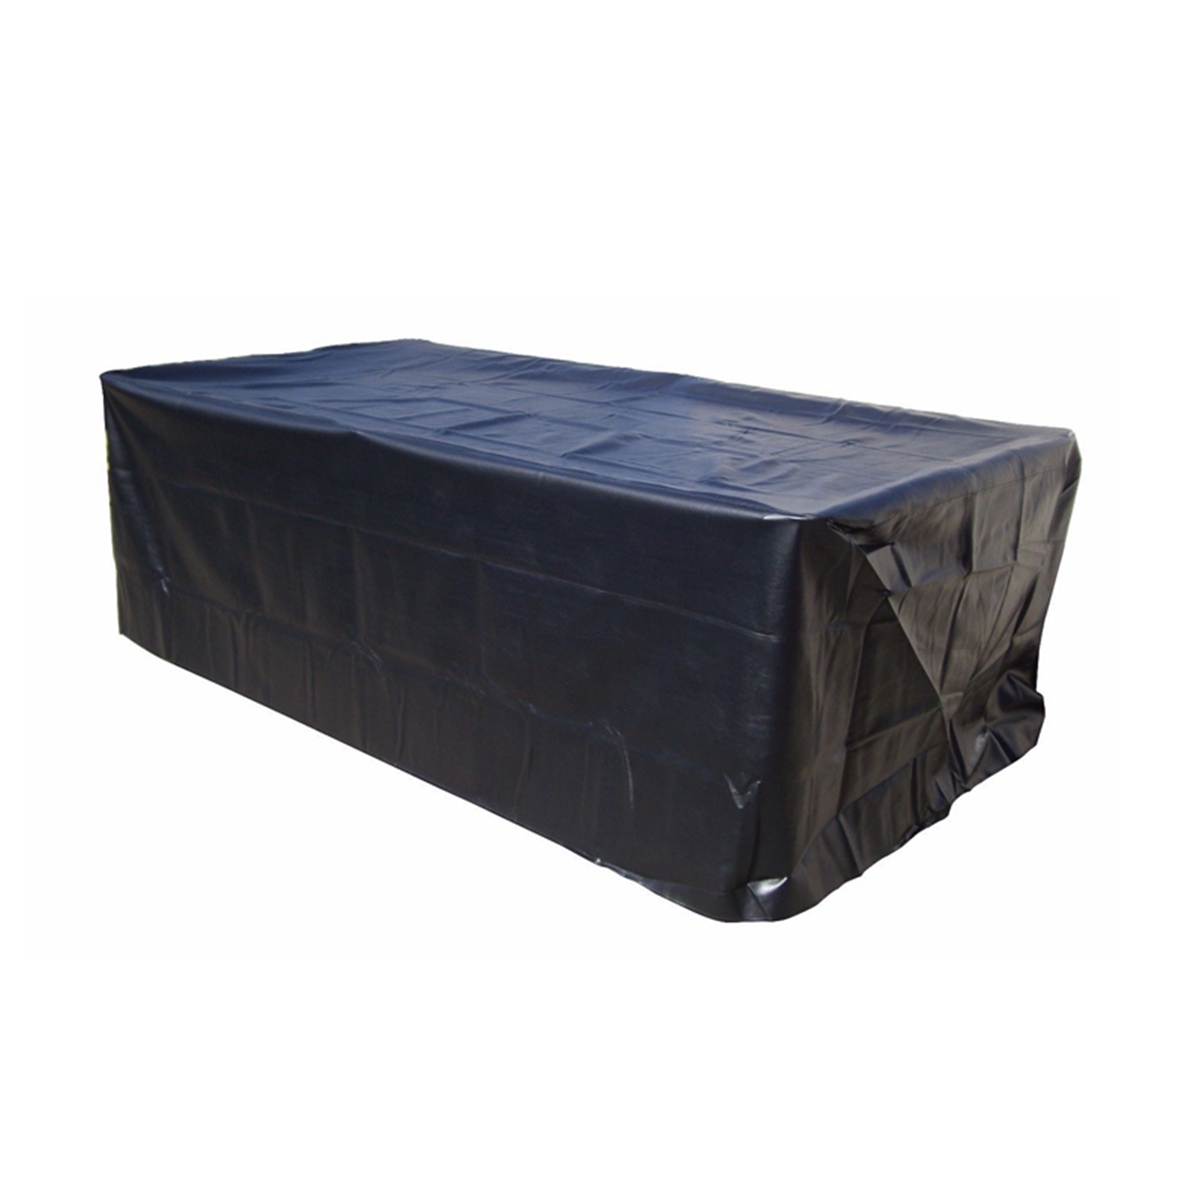 Find Multi Size Snooker Billiard Table Cover Polyester Waterproof Fabric Outdoor Pool for Sale on Gipsybee.com with cryptocurrencies